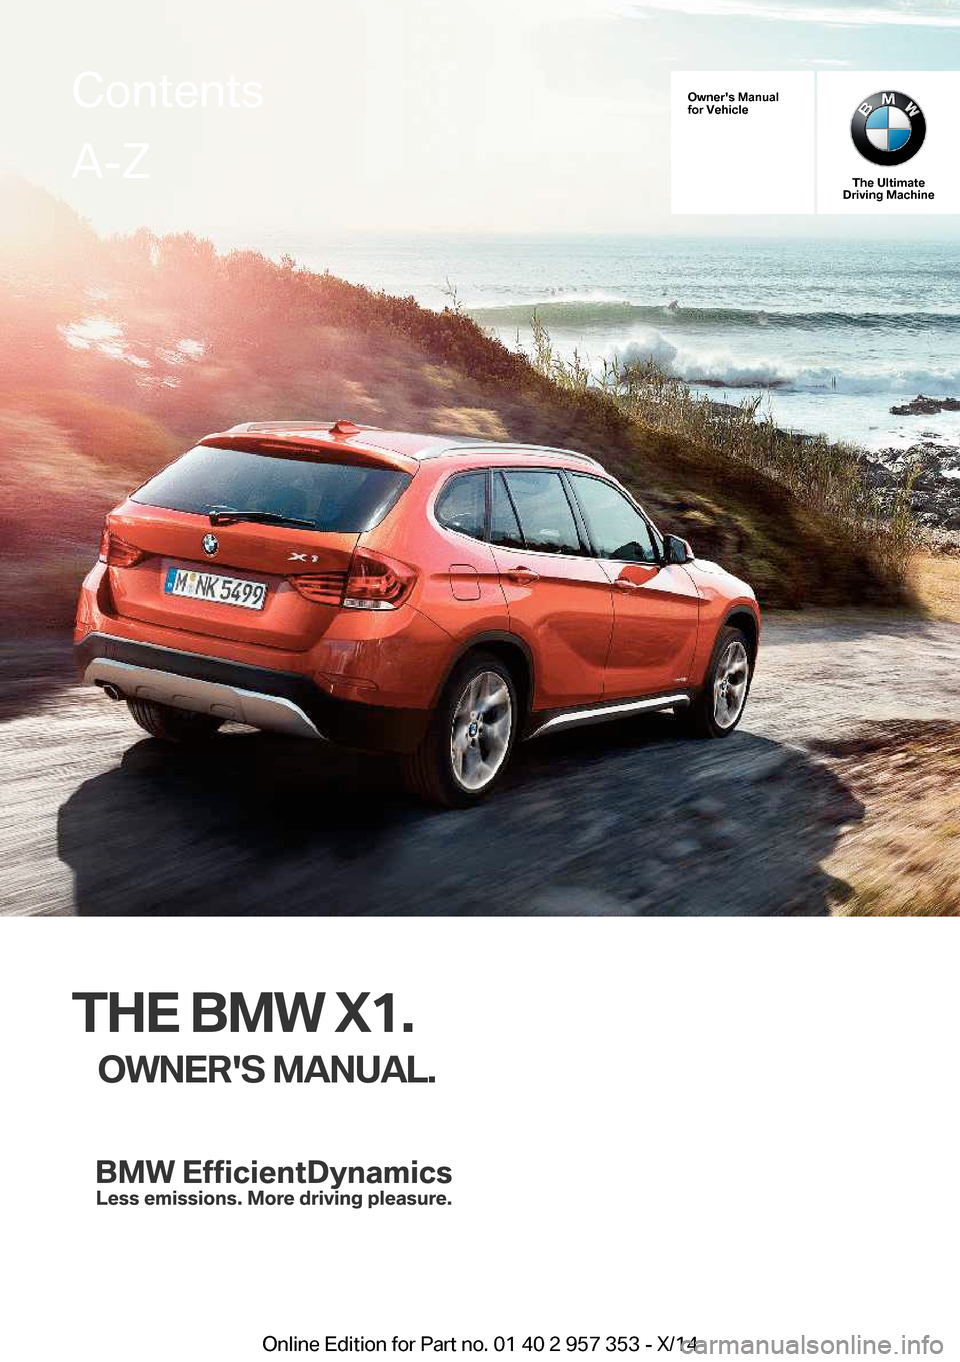 BMW X1 2014 E84 Owners Manual Owners Manual
for Vehicle
The Ultimate
Driving Machine
THE BMW X1.
OWNERS MANUAL.
ContentsA-Z
Online Edition for Part no. 01 40 2 957 353 - X/14   